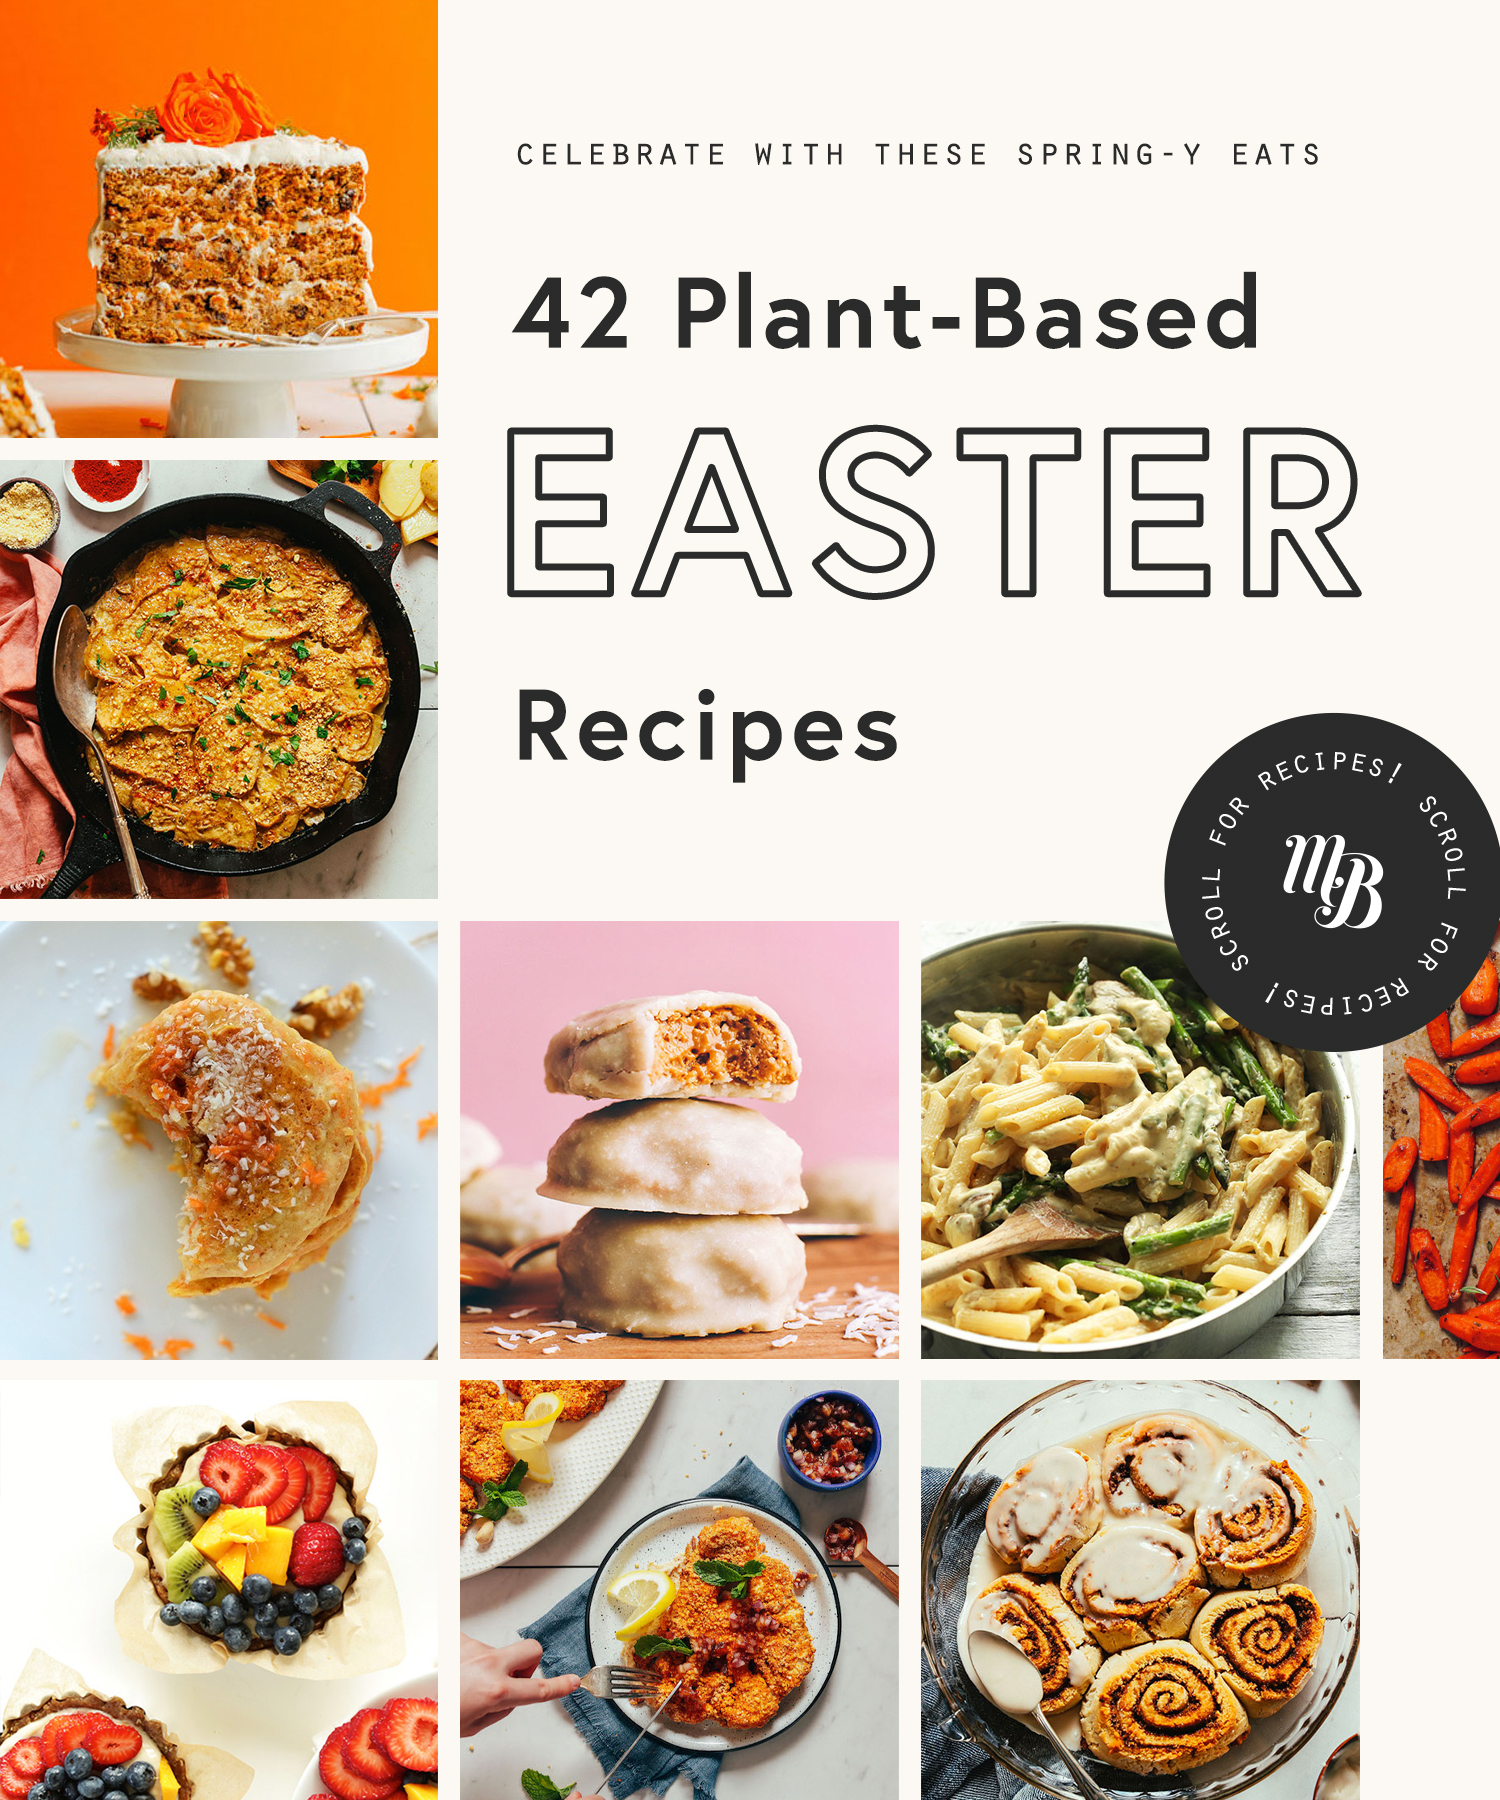 Assortment of plant-based Easter recipes